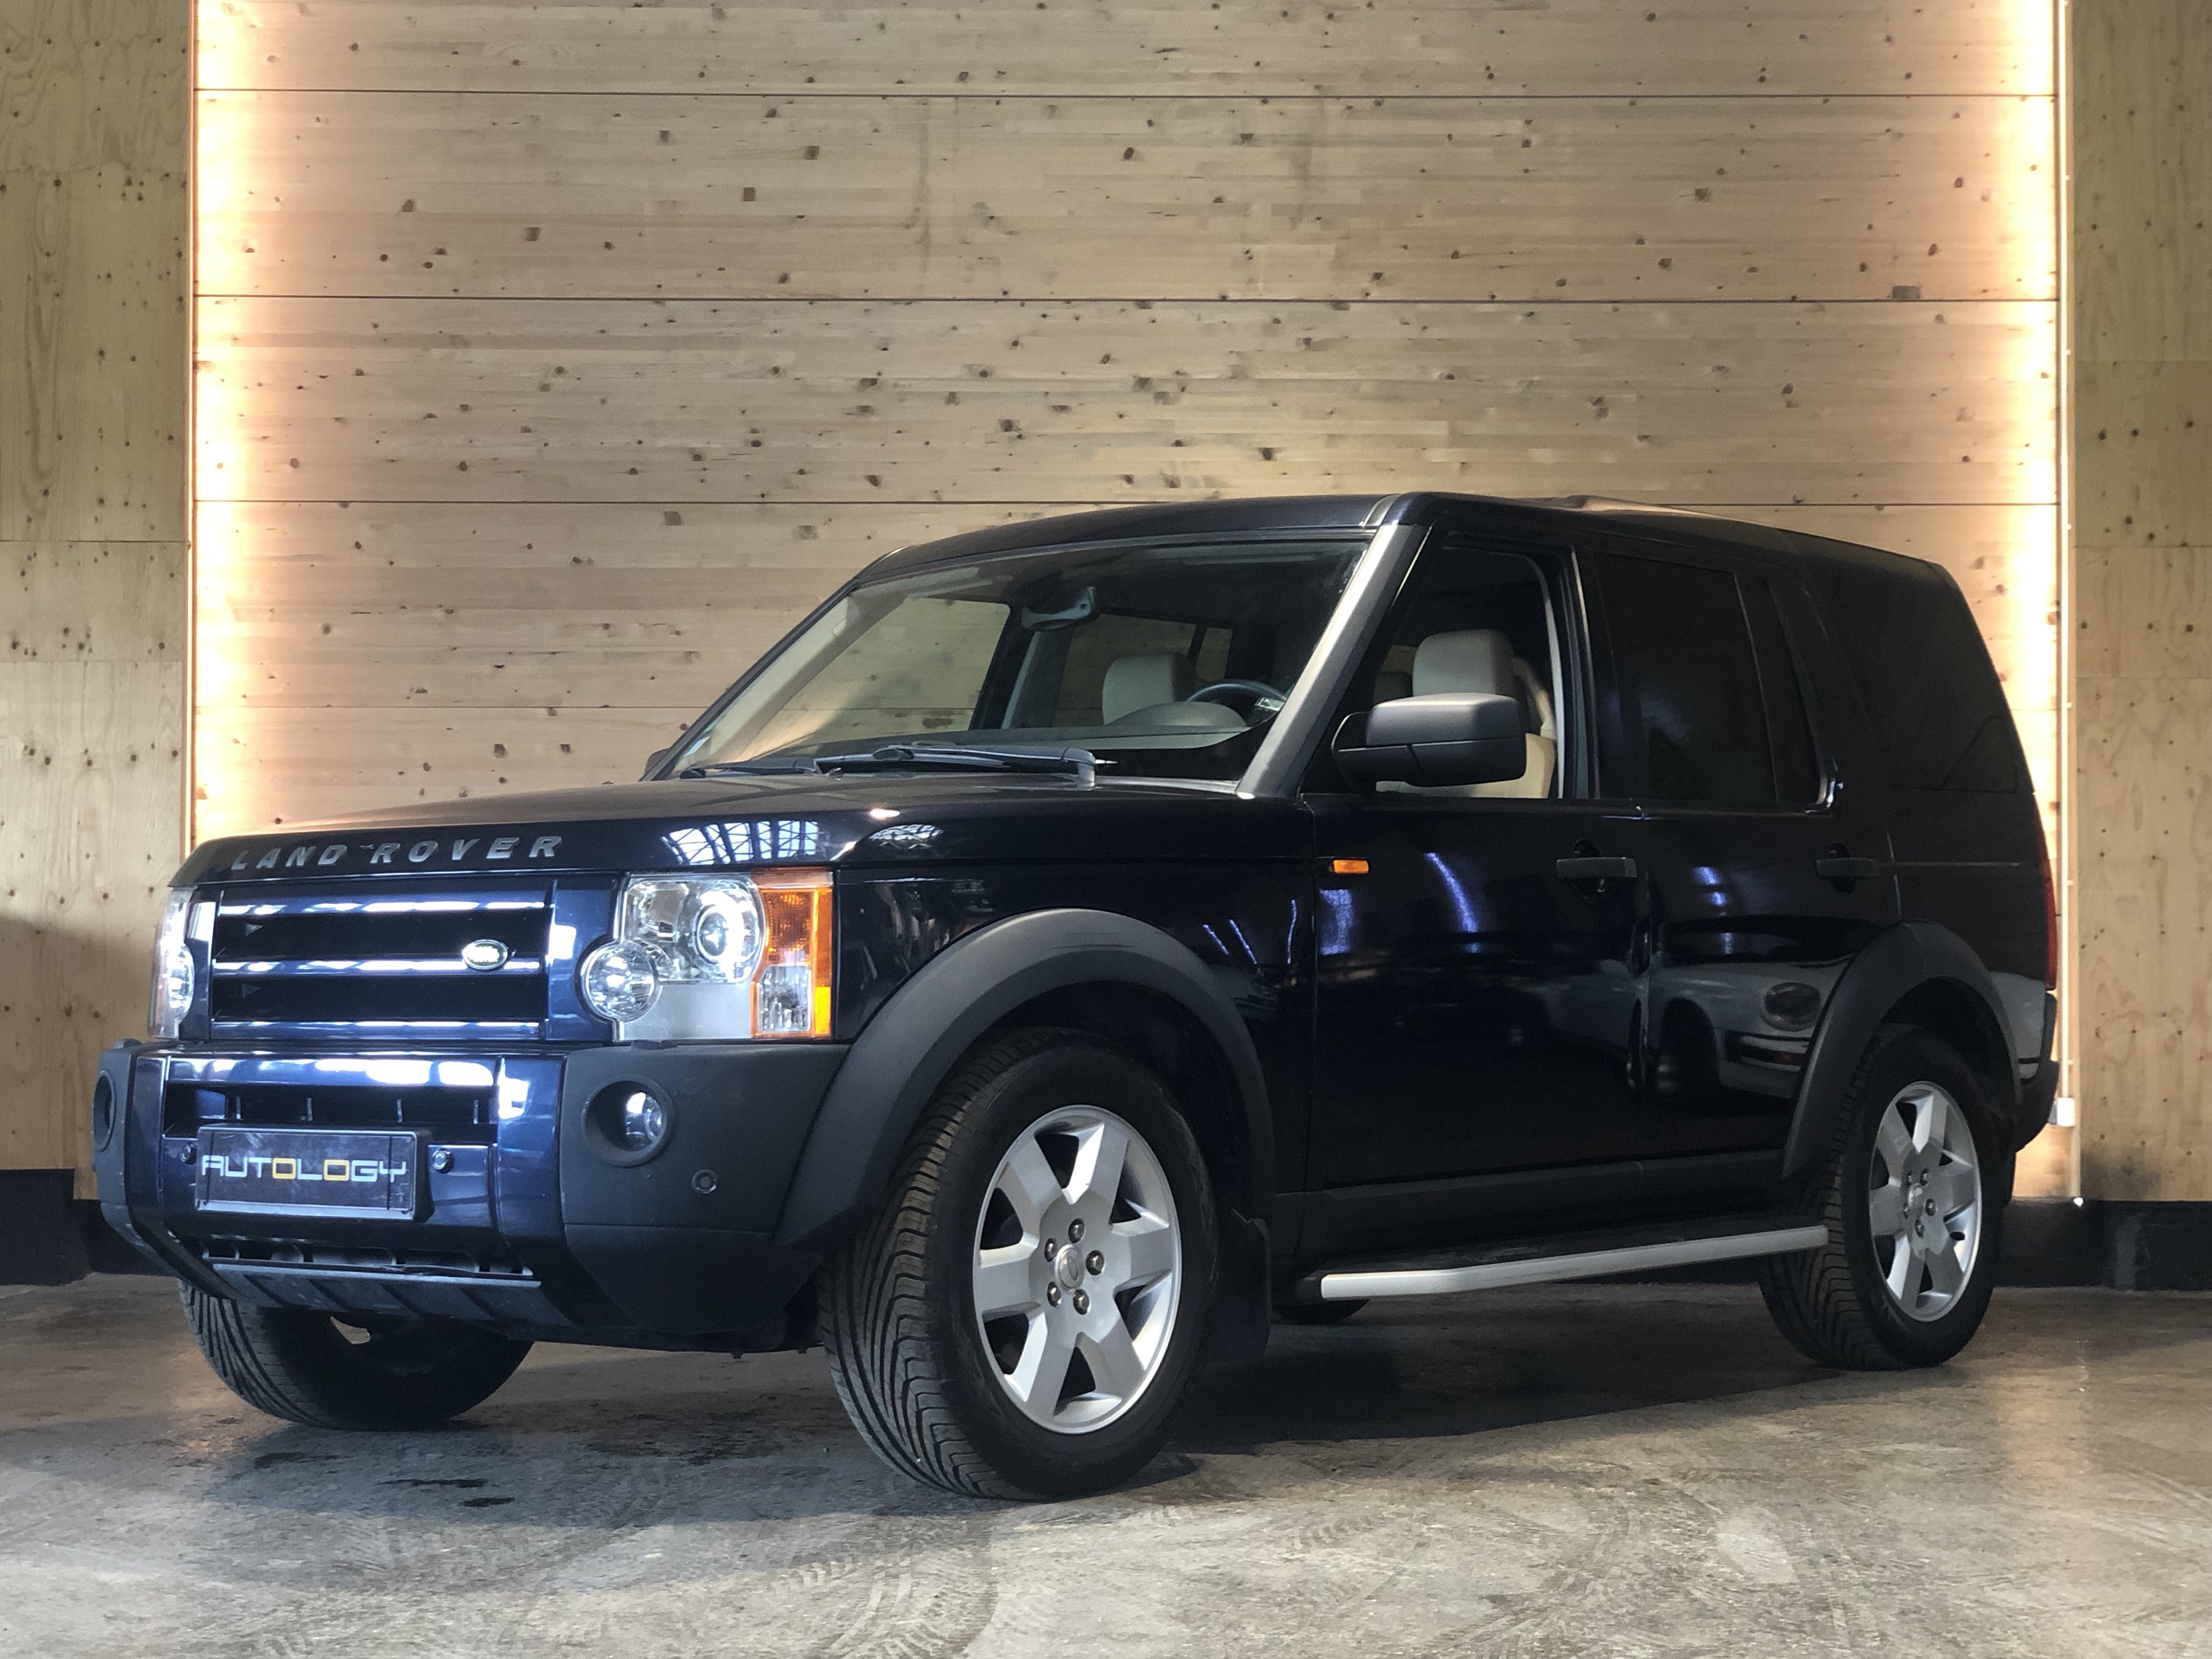 Land Rover Discovery V8 4.4 HSE 7 places